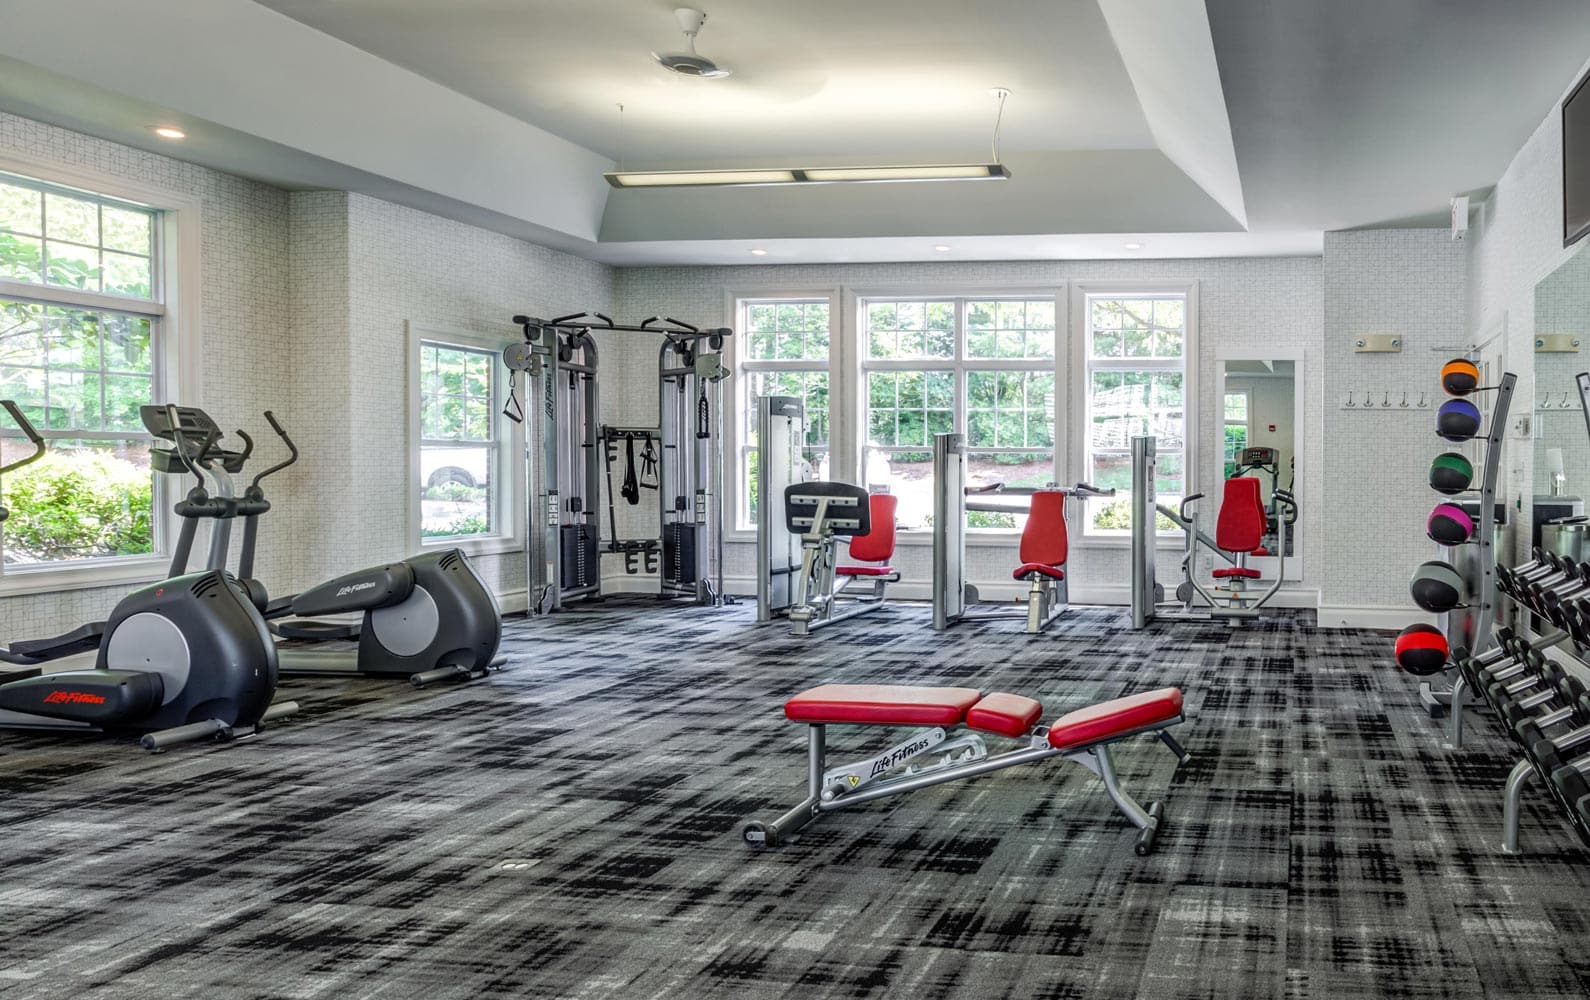 Fitness center in Essex residence designed by Annette Jaffe Interiors